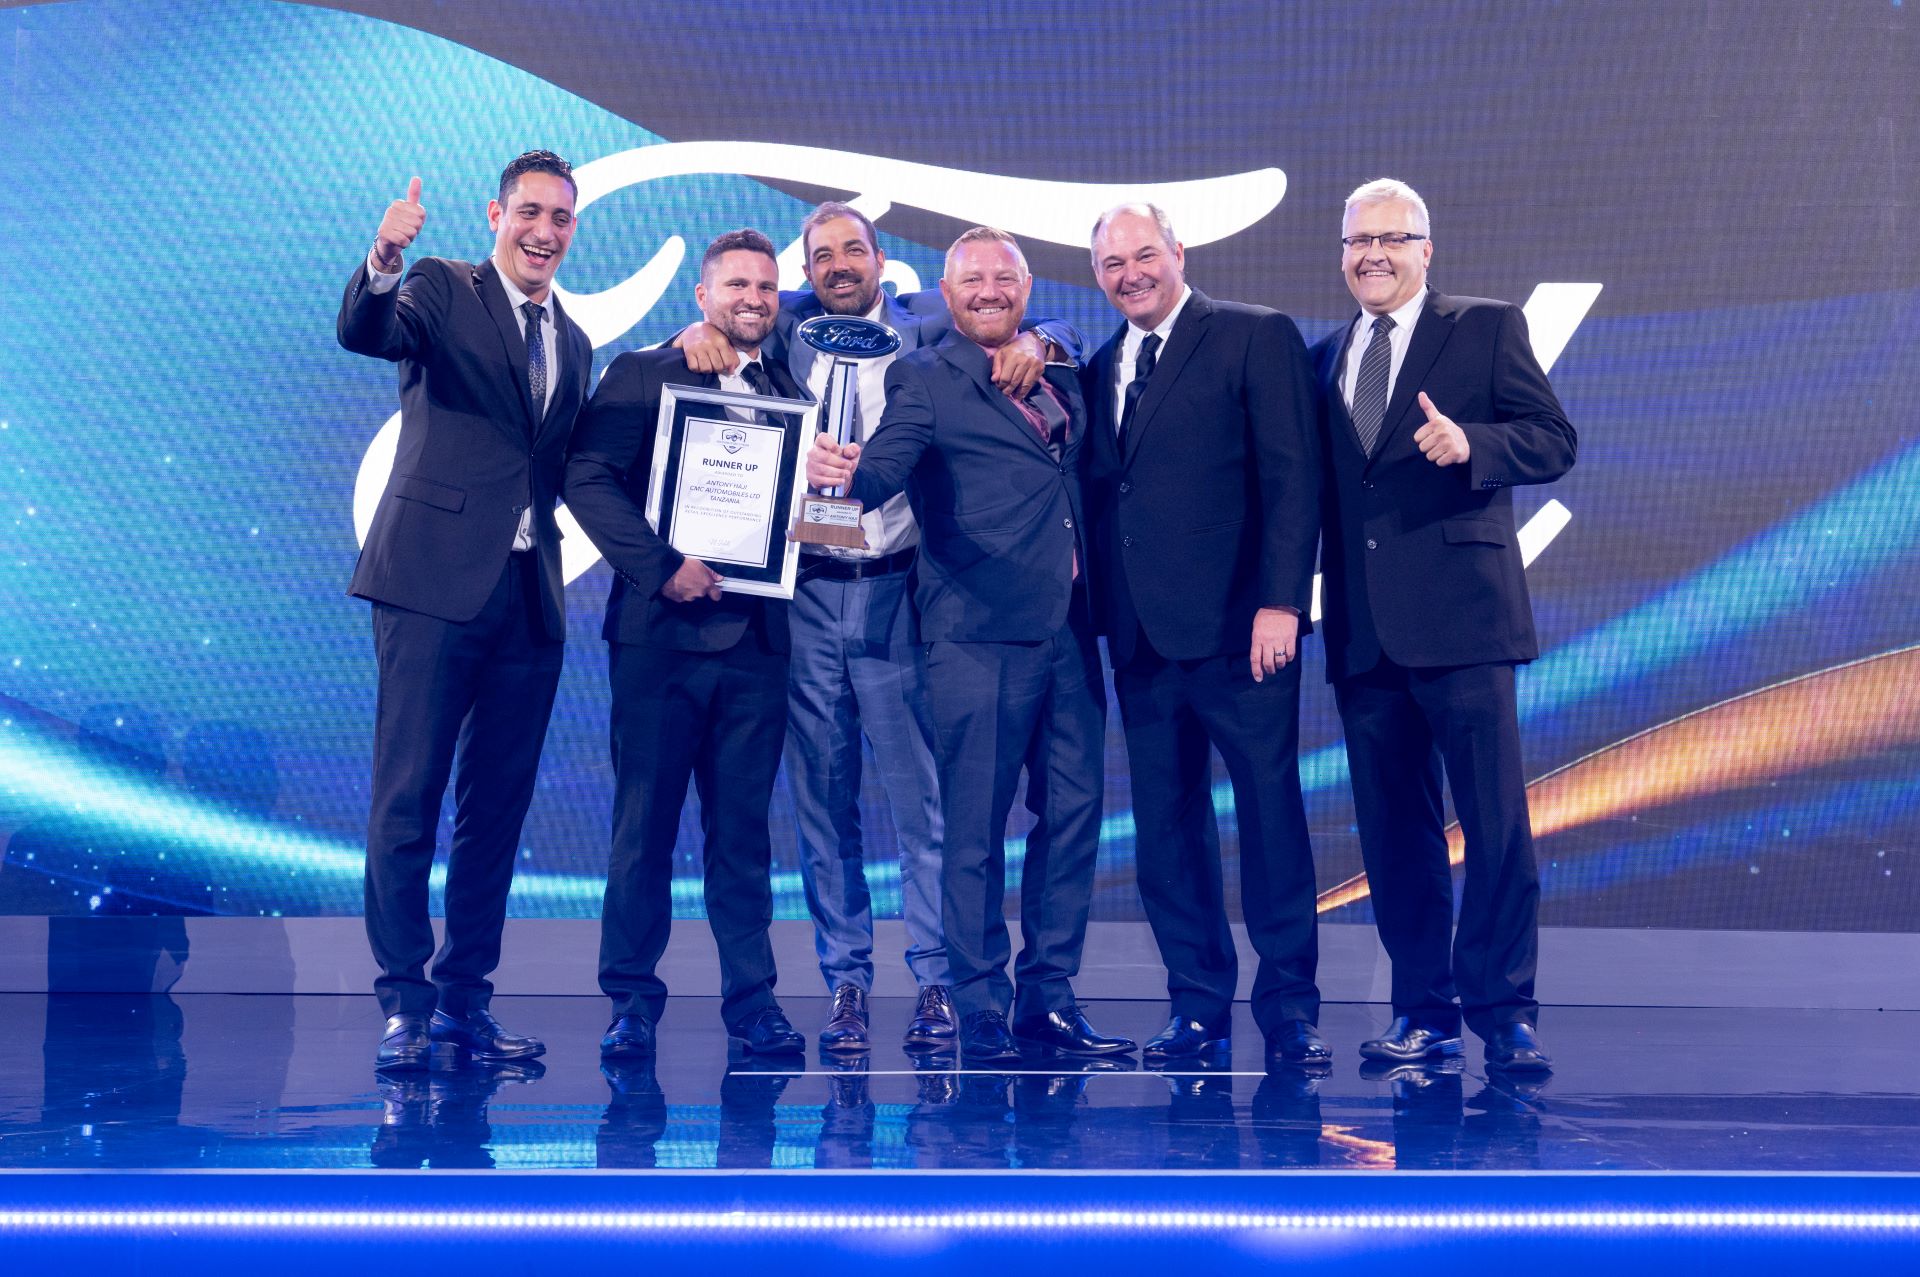 Ford Africa Celebrates Excellence at Annual Conference